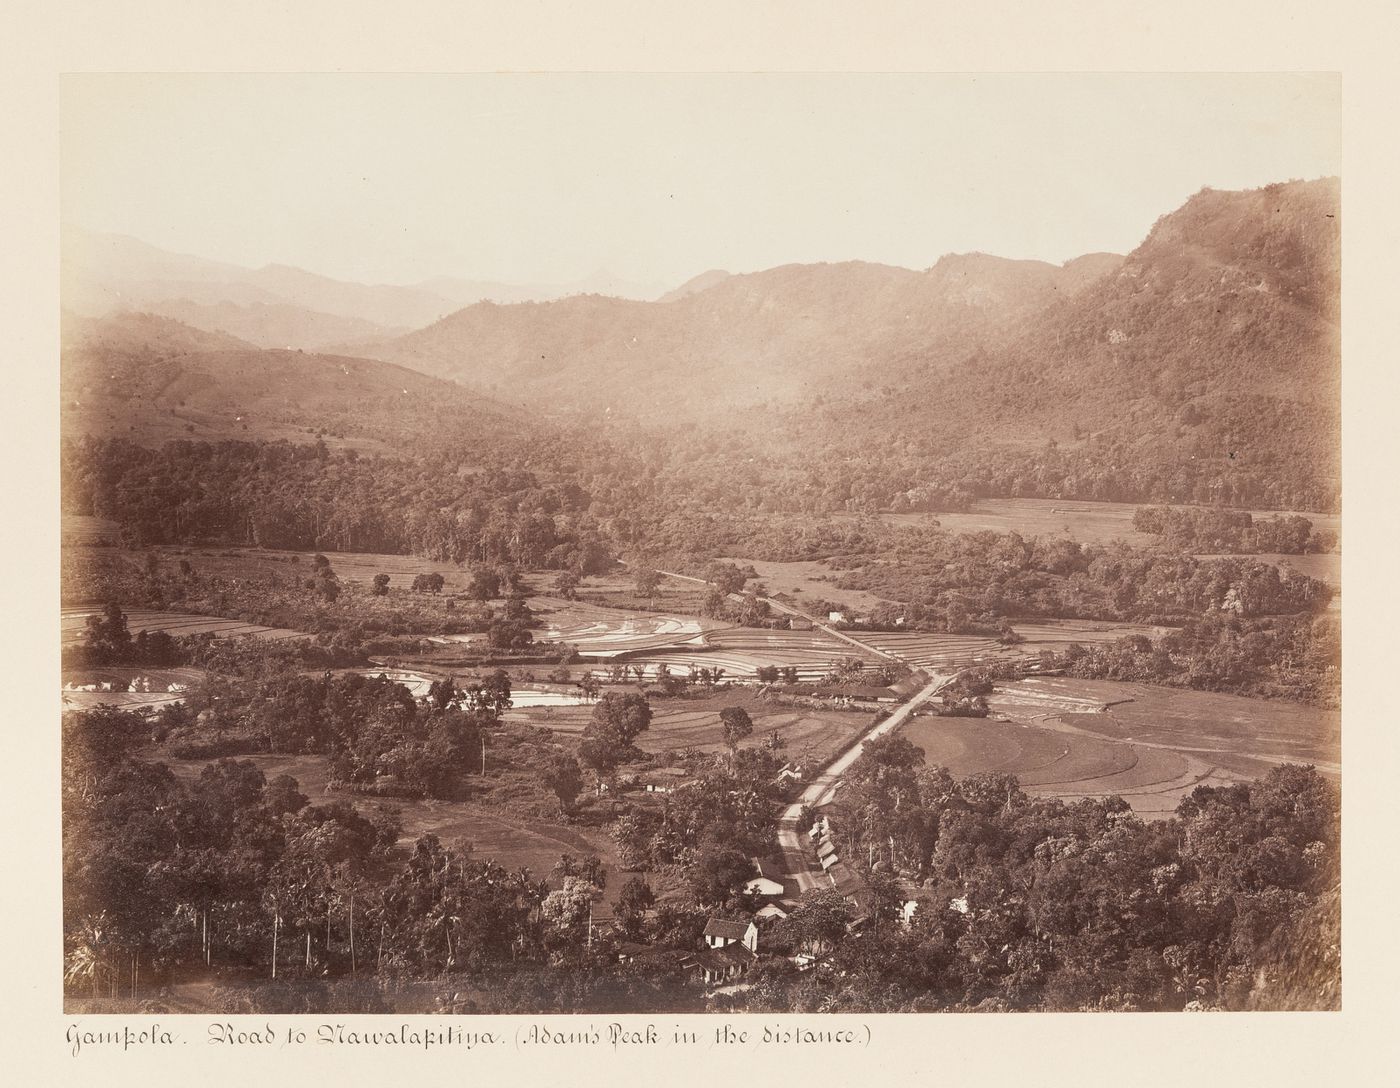 Partial view of Gampola showing agricultural land with mountains, including Adam's Peak, in the background, Ceylon (now Sri Lanka)